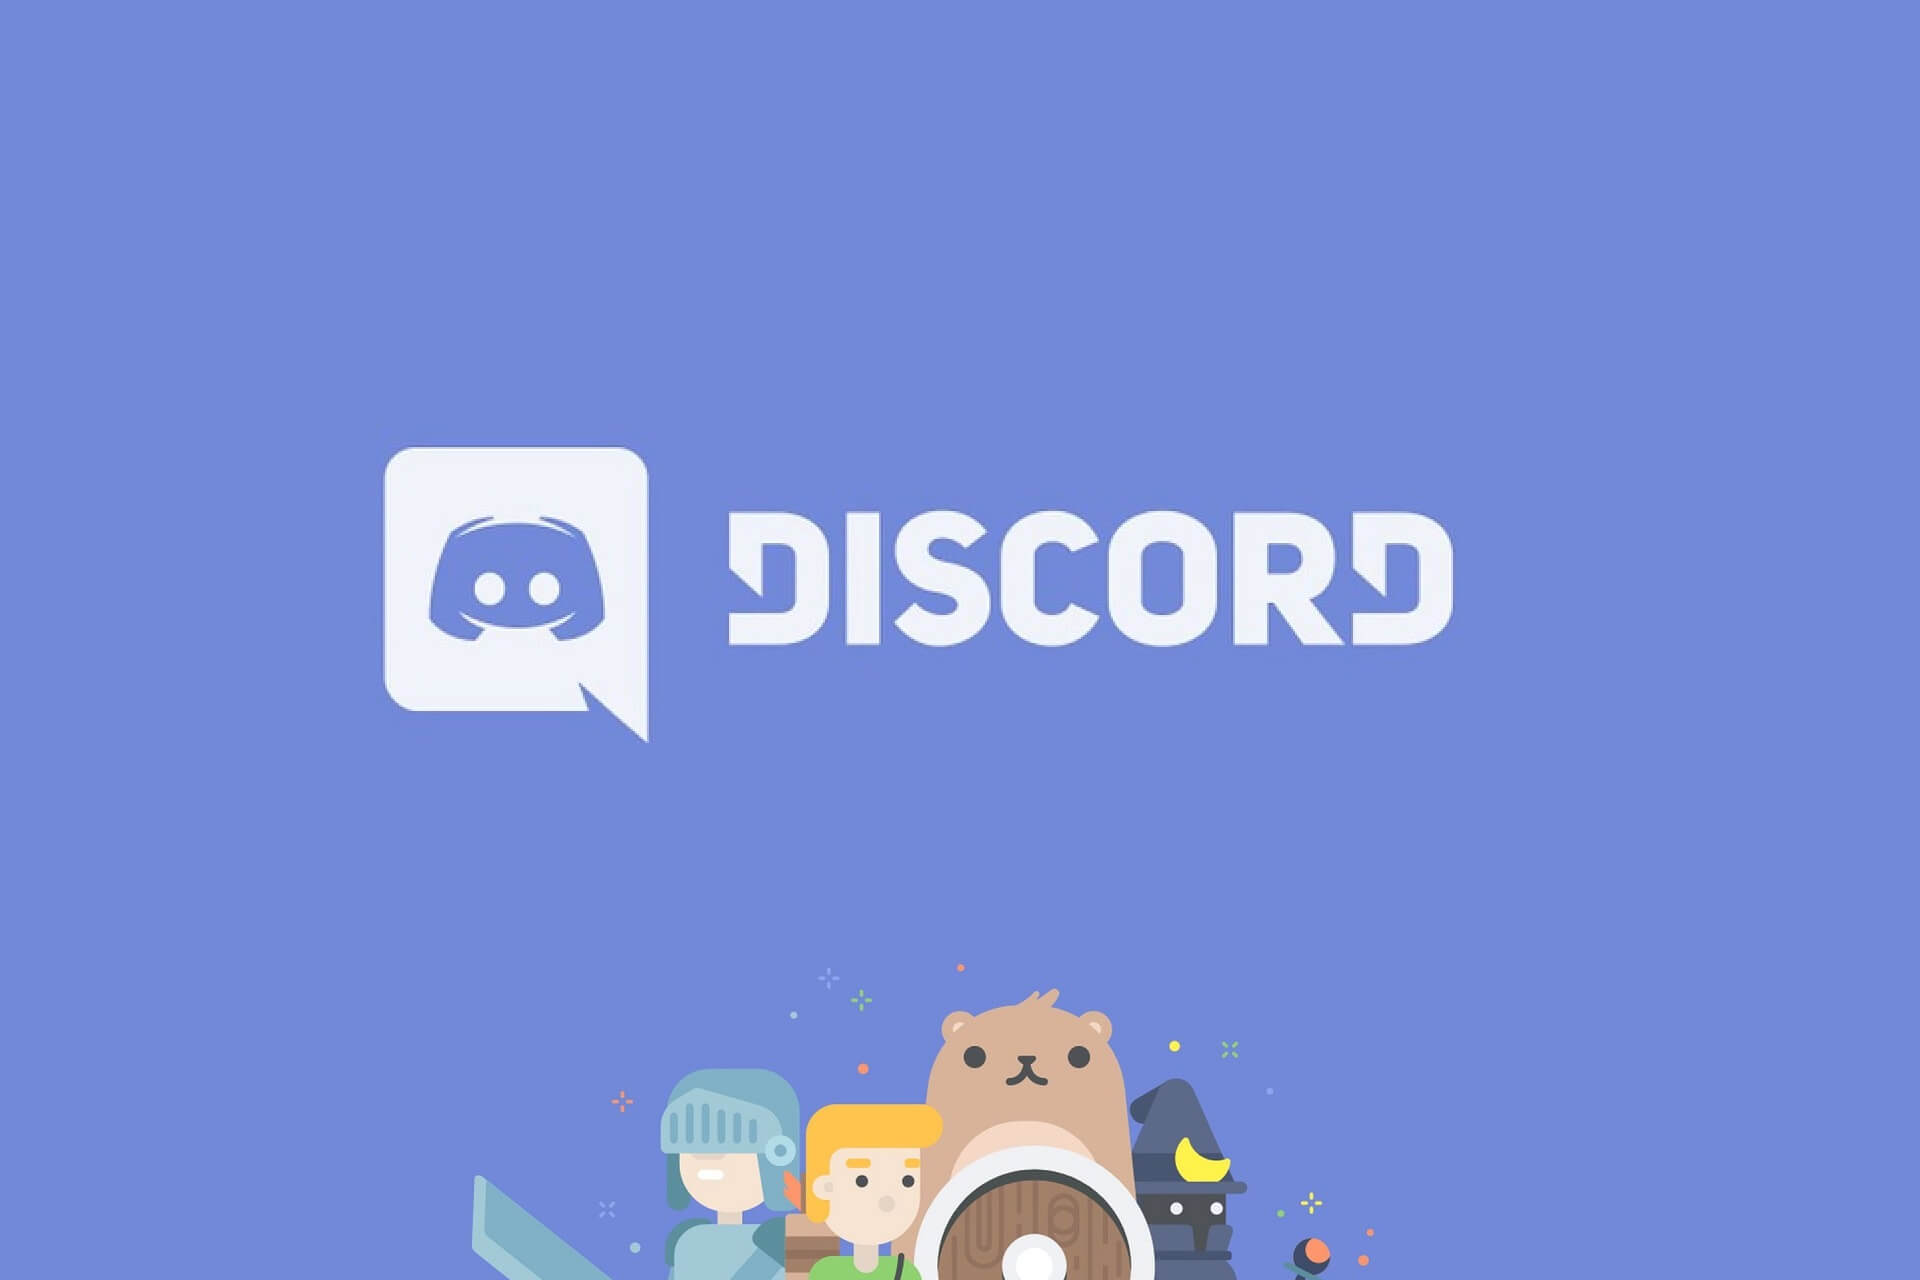 Discord open in browser on mobile